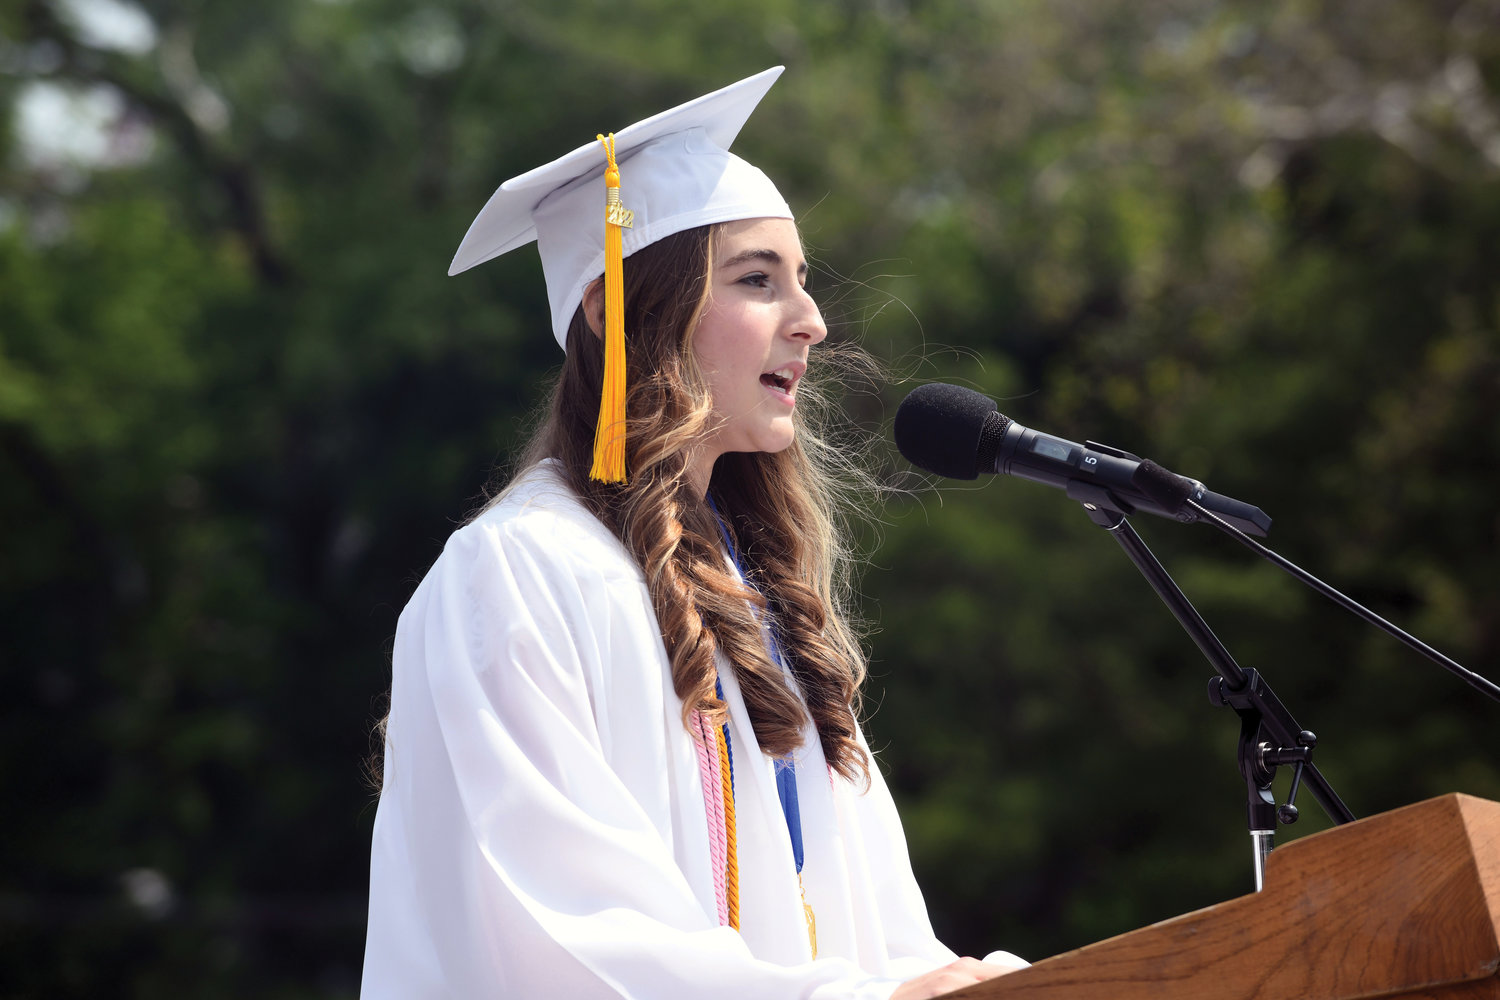 Valedictorian Julia Michela Ognibene extends words of wisdom to the members of her class.